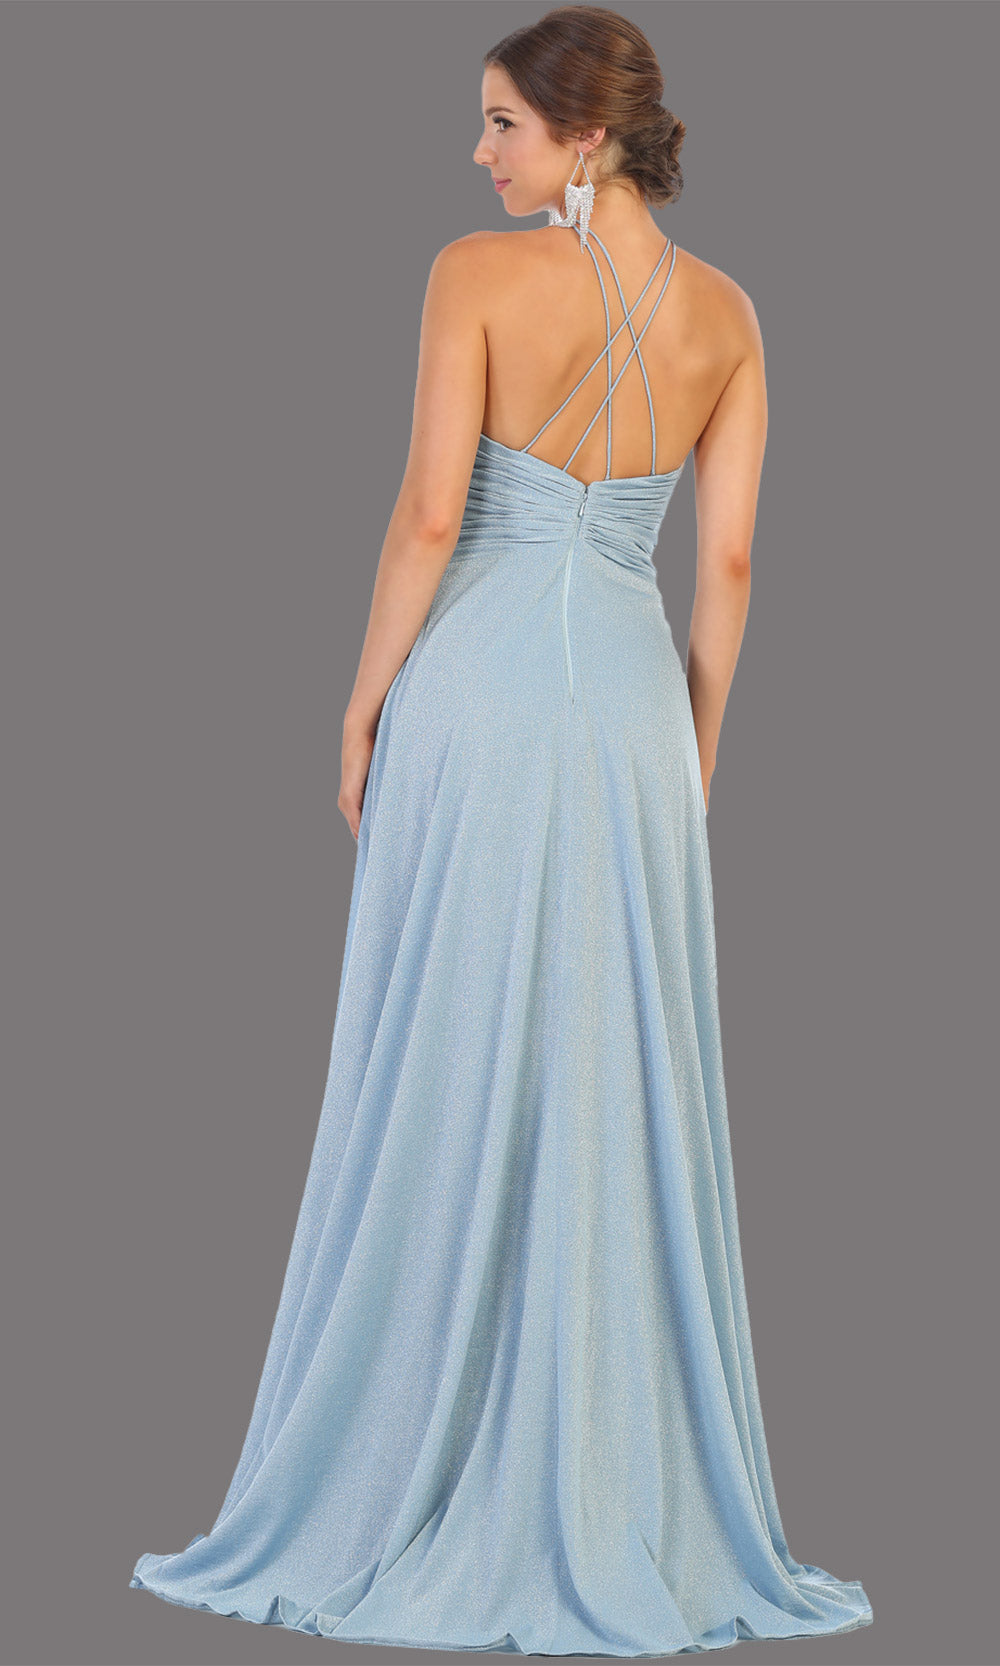 Mayqueen MQ1729 long dusty blue flowy dress w/ high neck & high slit. This light blue dress is perfect for bridesmaid dresses, simple wedding guest dress, prom dress, gala, black tie wedding. Plus sizes are available, evening party dress-b.jpg